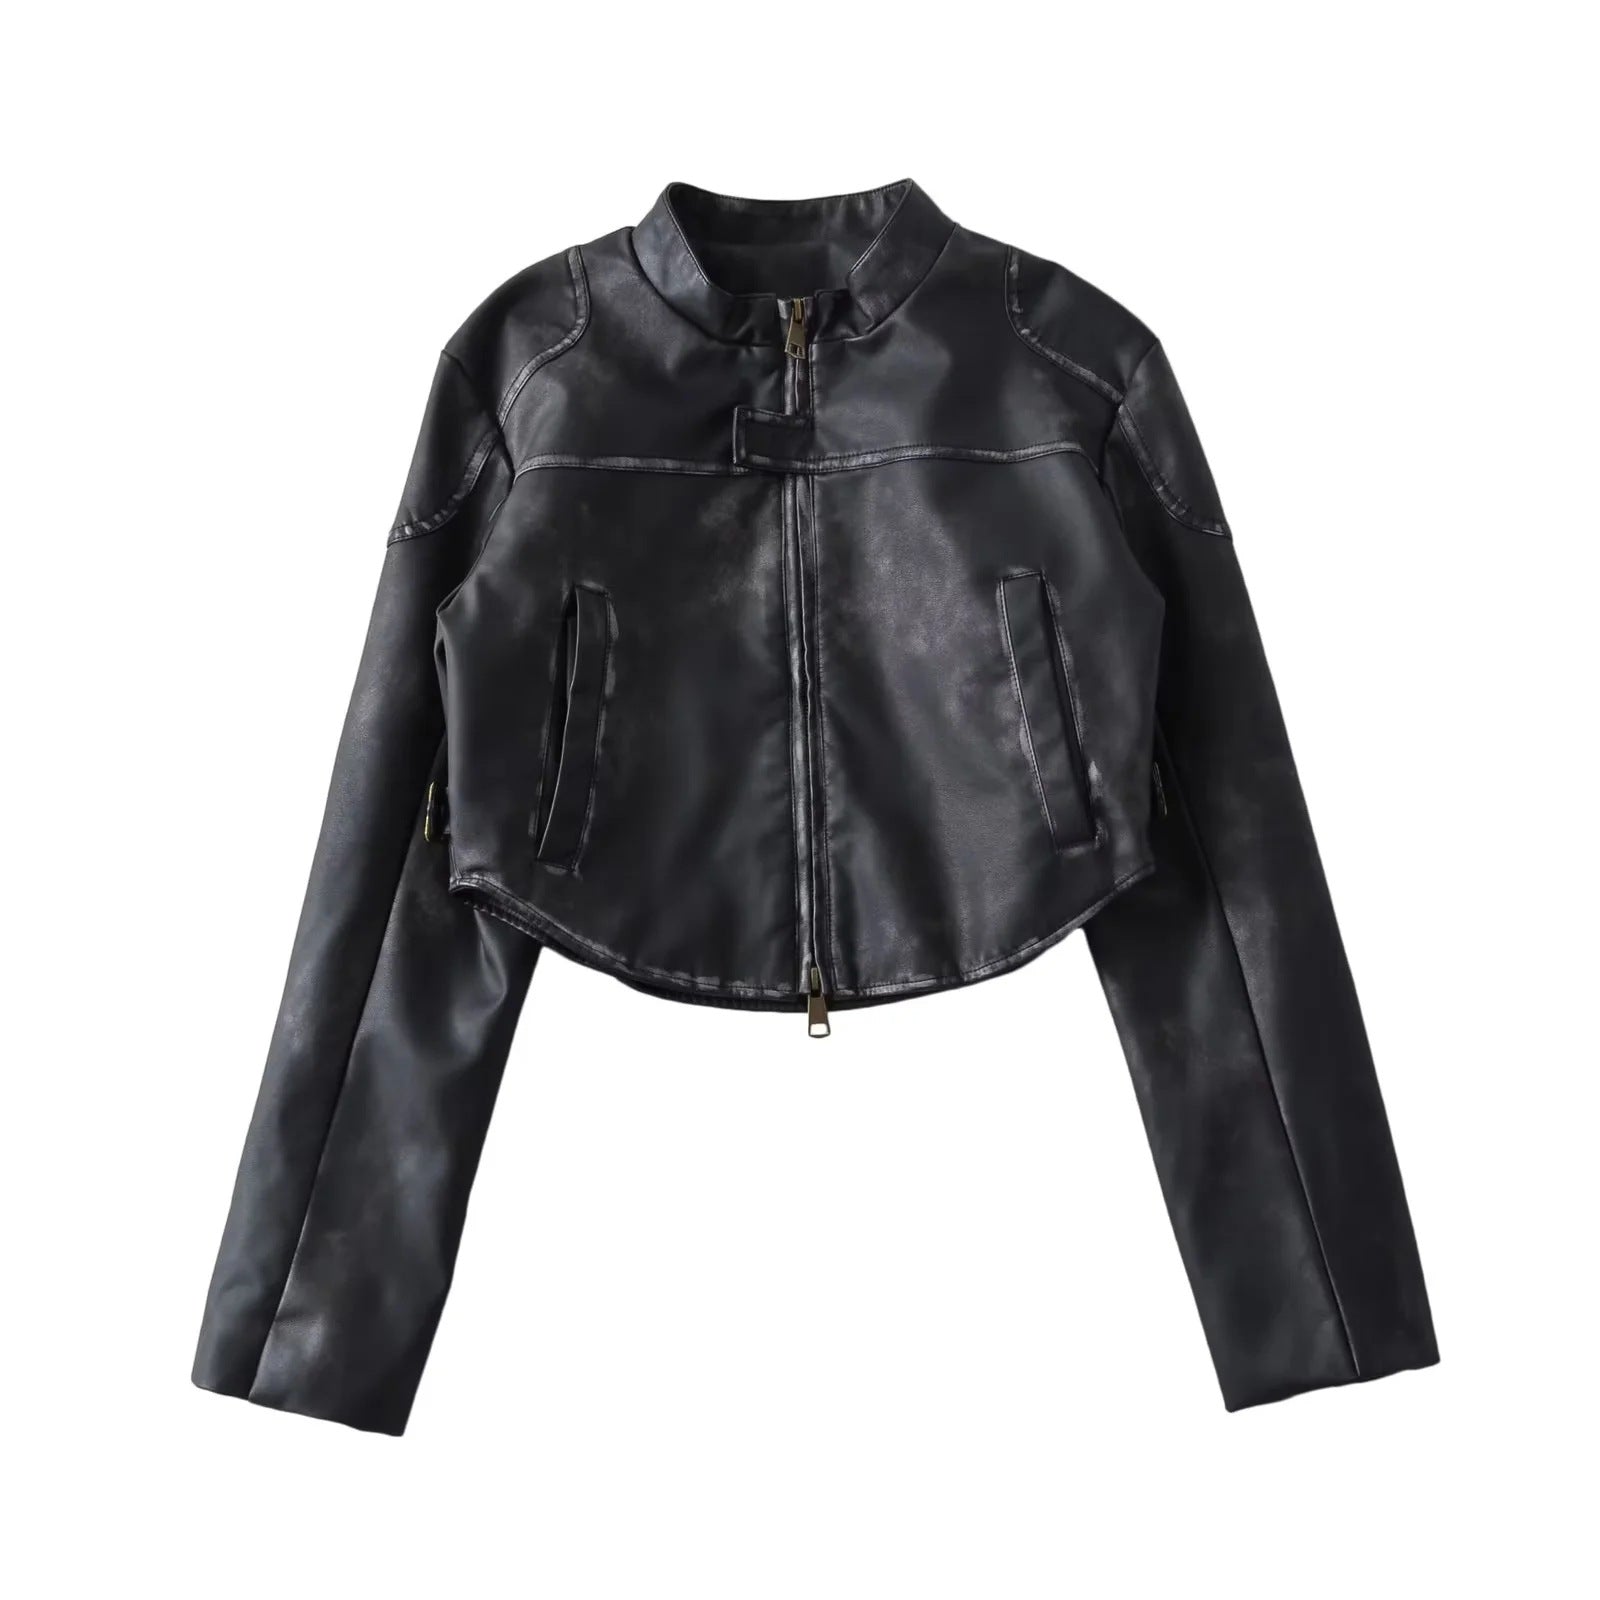 Women's Retro Distressed Leather With Stand Collar Jackets